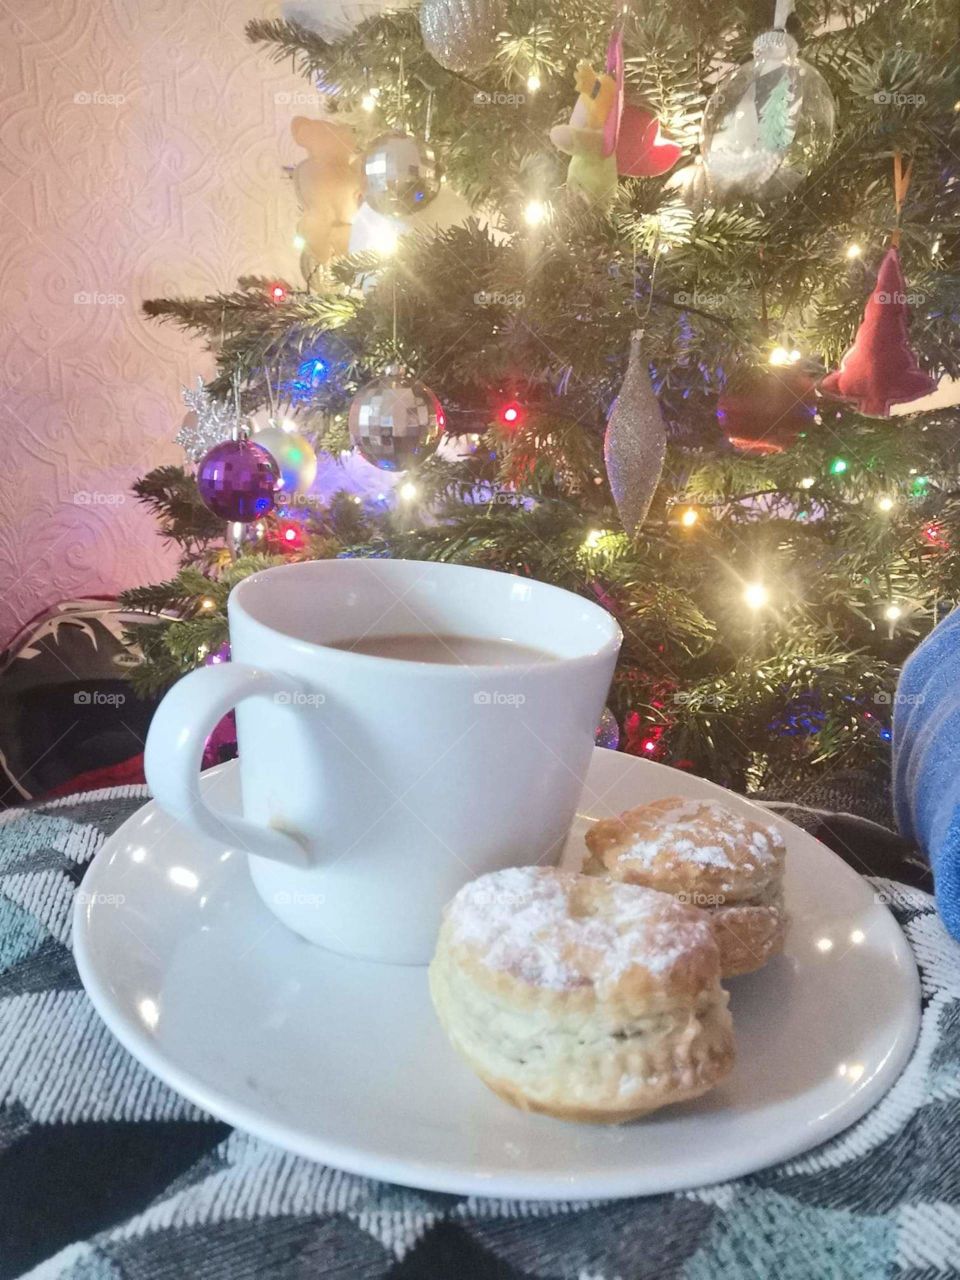 Coffee and a mince pie , it's nearly Christmas